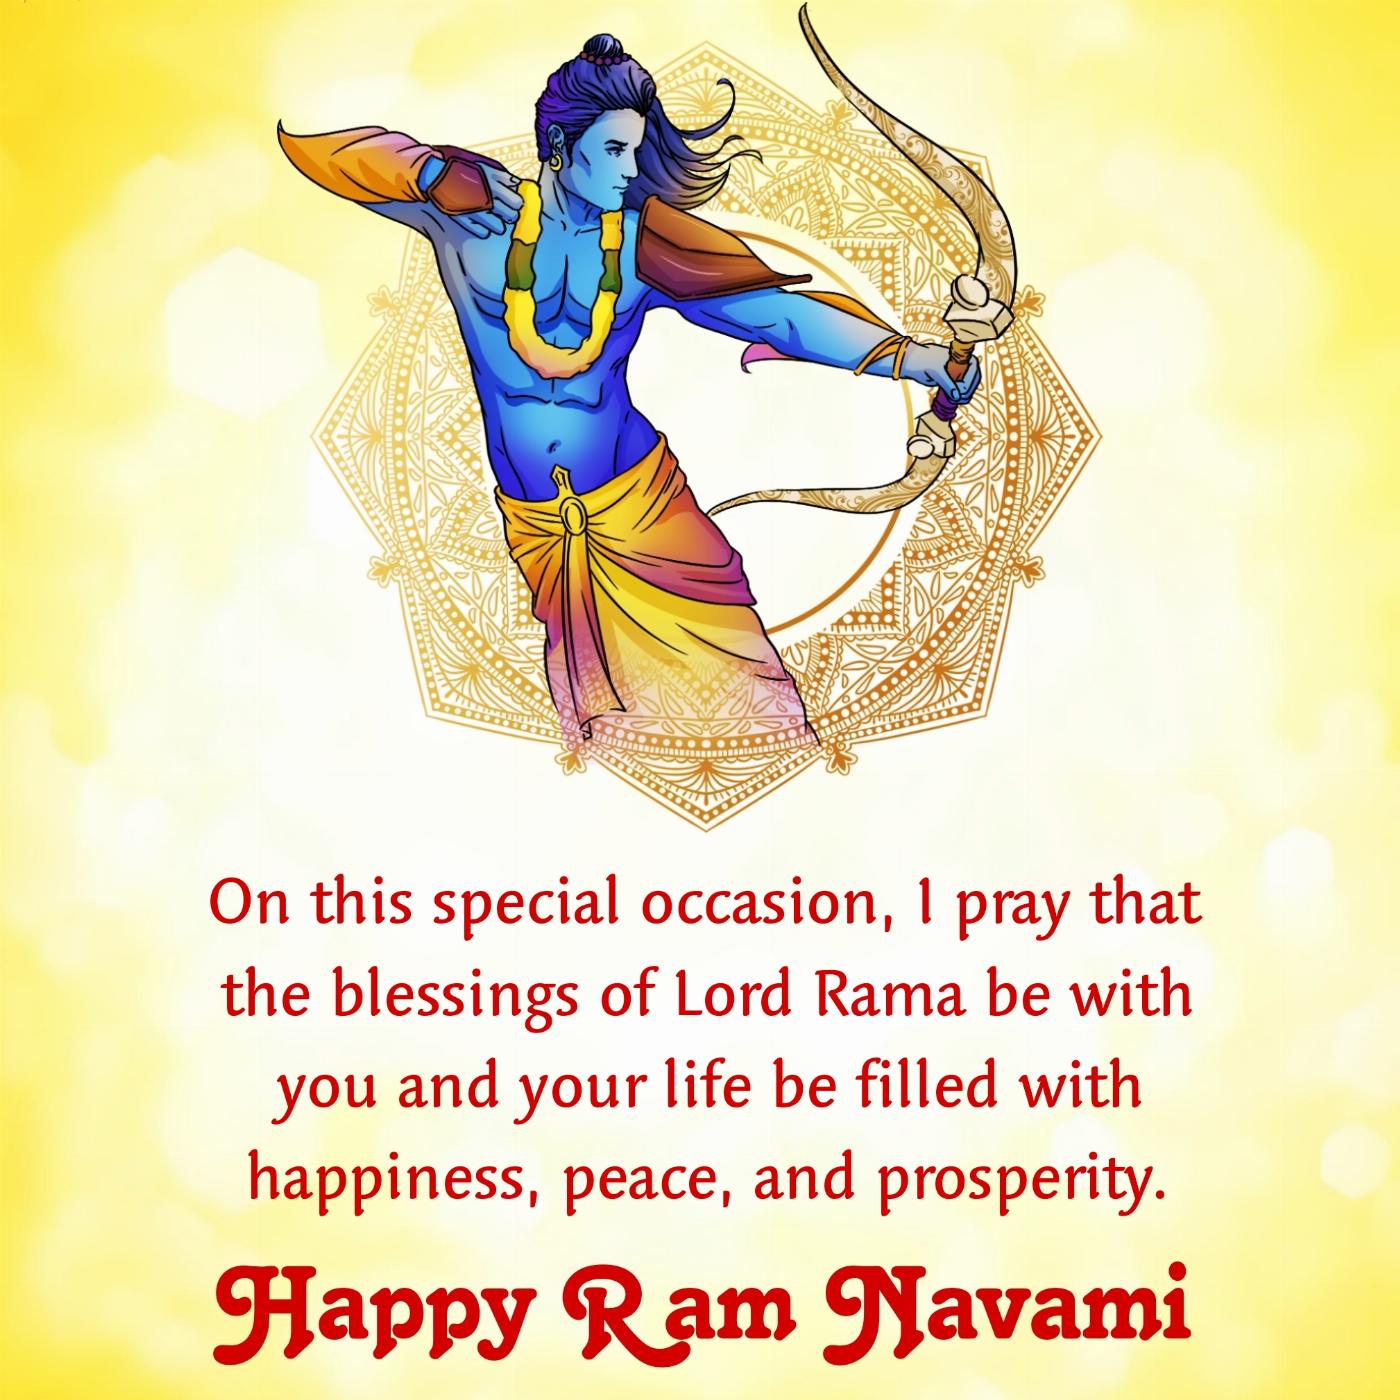 On the pious occasion of Ram Navami I wish that